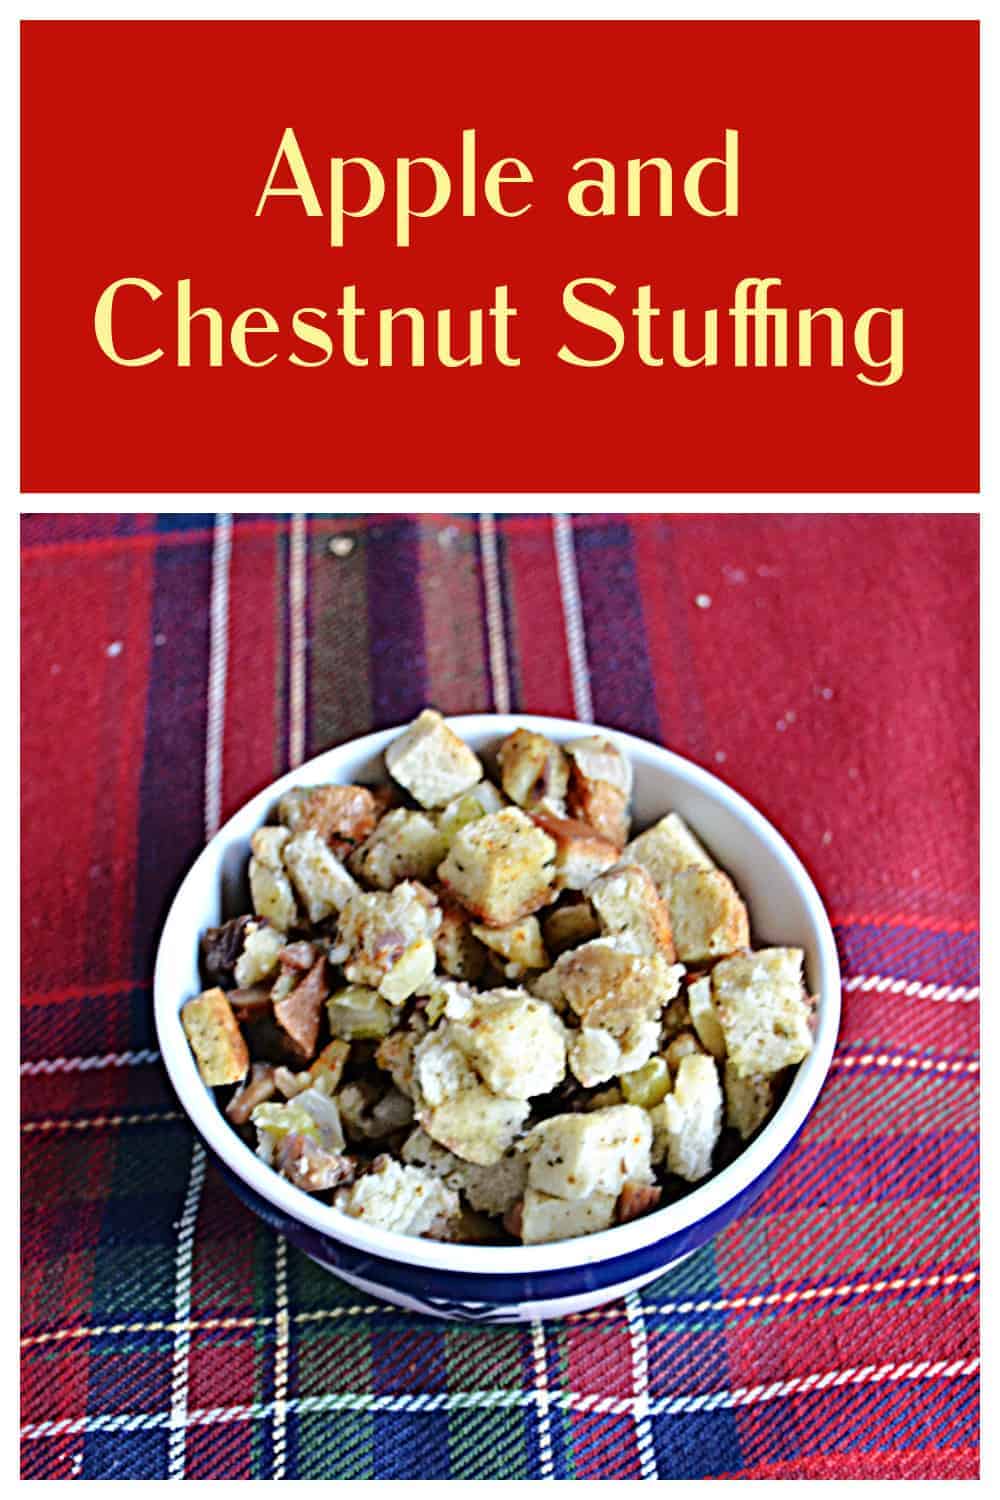 Apple and Chestnut Stuffing